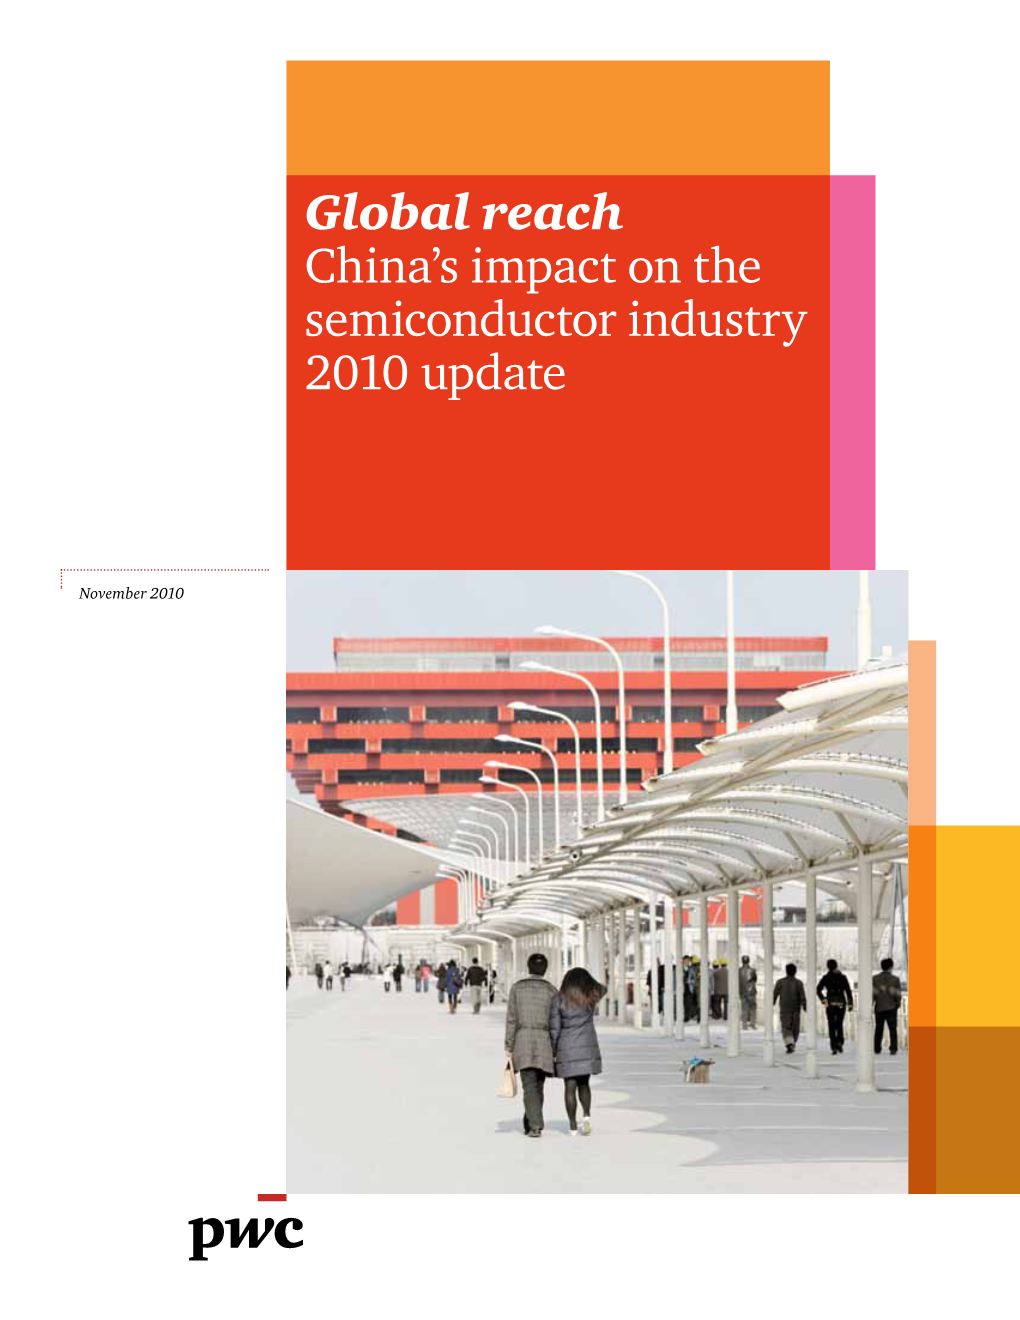 Global Reach China's Impact on the Semiconductor Industry 2010 Update